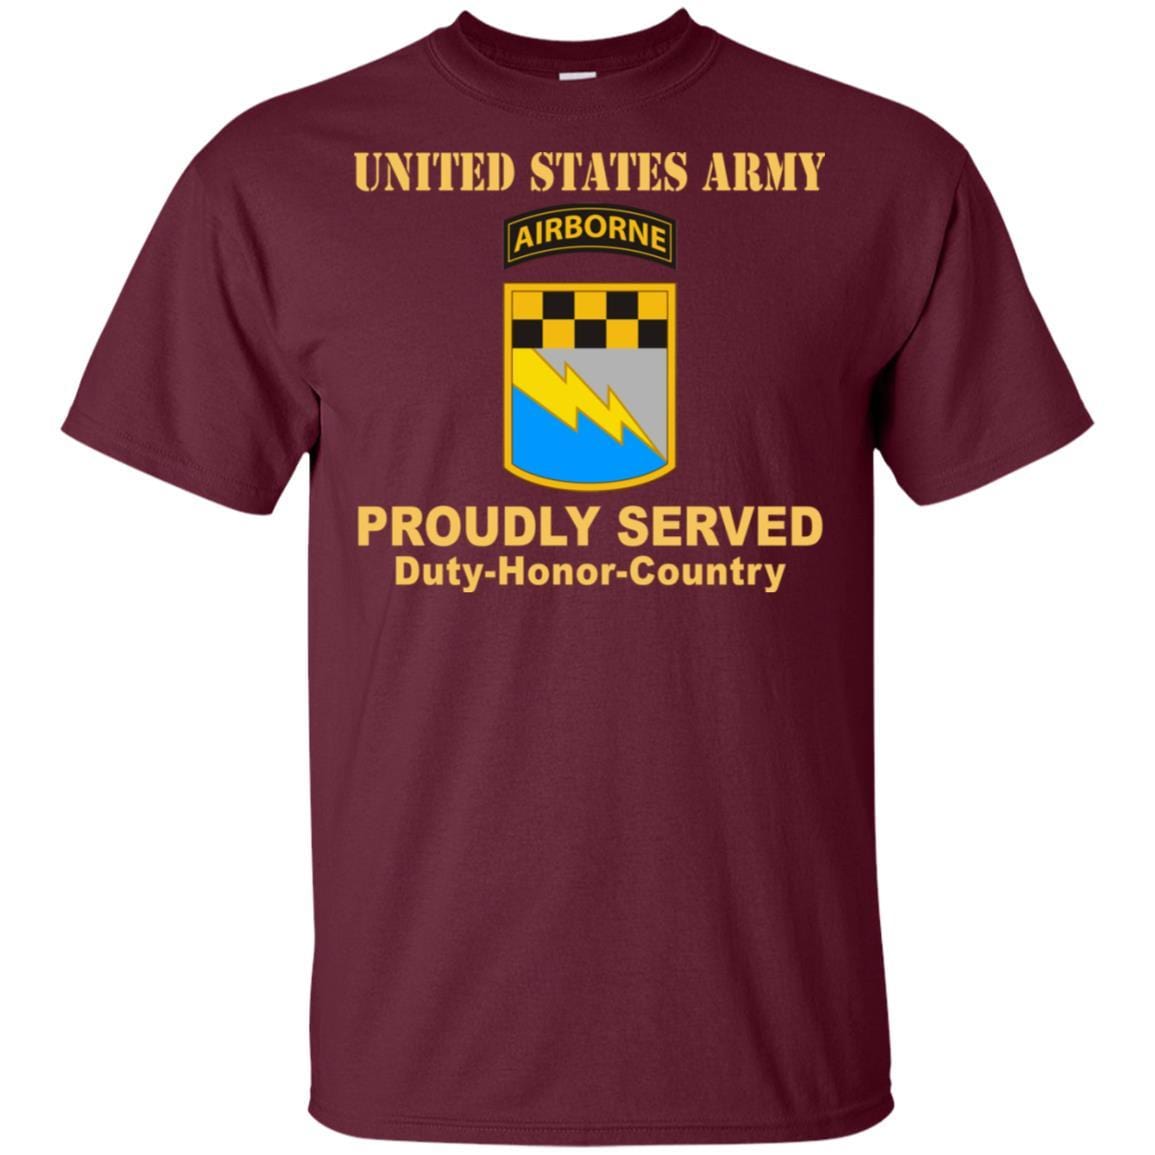 US ARMY 525TH MILITARY INTELLIGENCE BRIGADE W- AIRBORNE TAB- Proudly Served T-Shirt On Front For Men-TShirt-Army-Veterans Nation